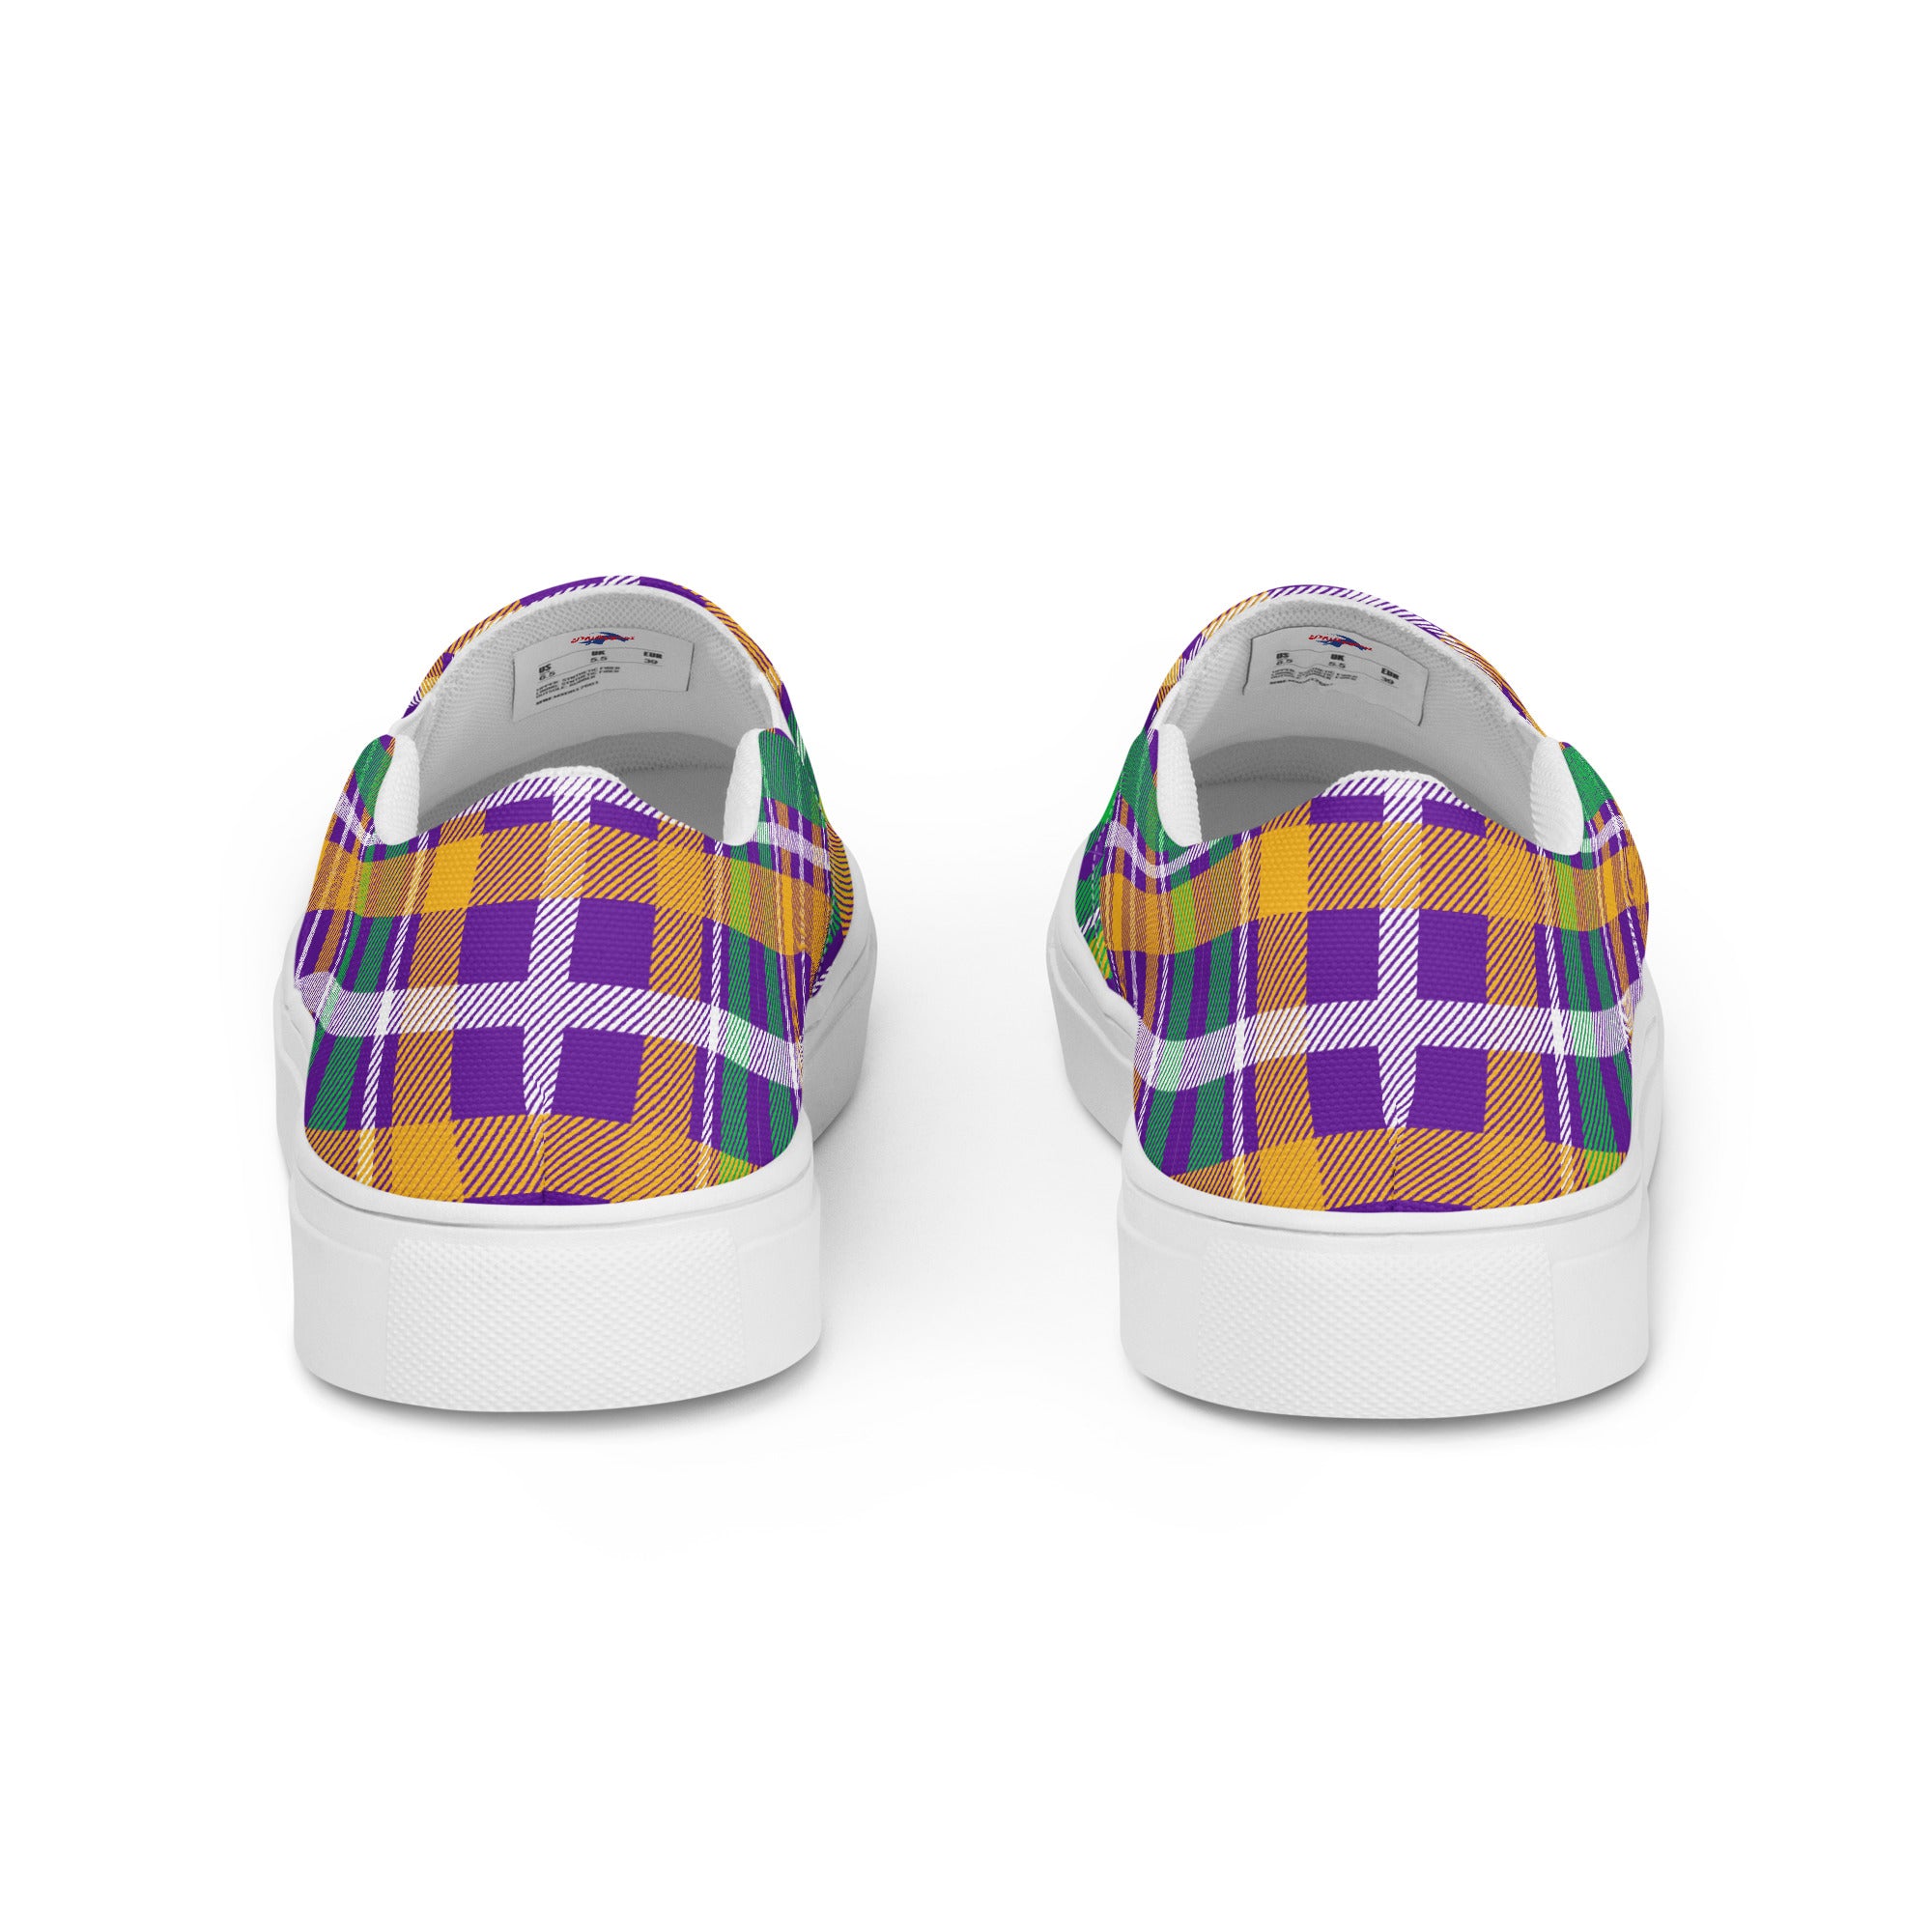 "The Mummers" Men’s Slip-on Canvas Shoes